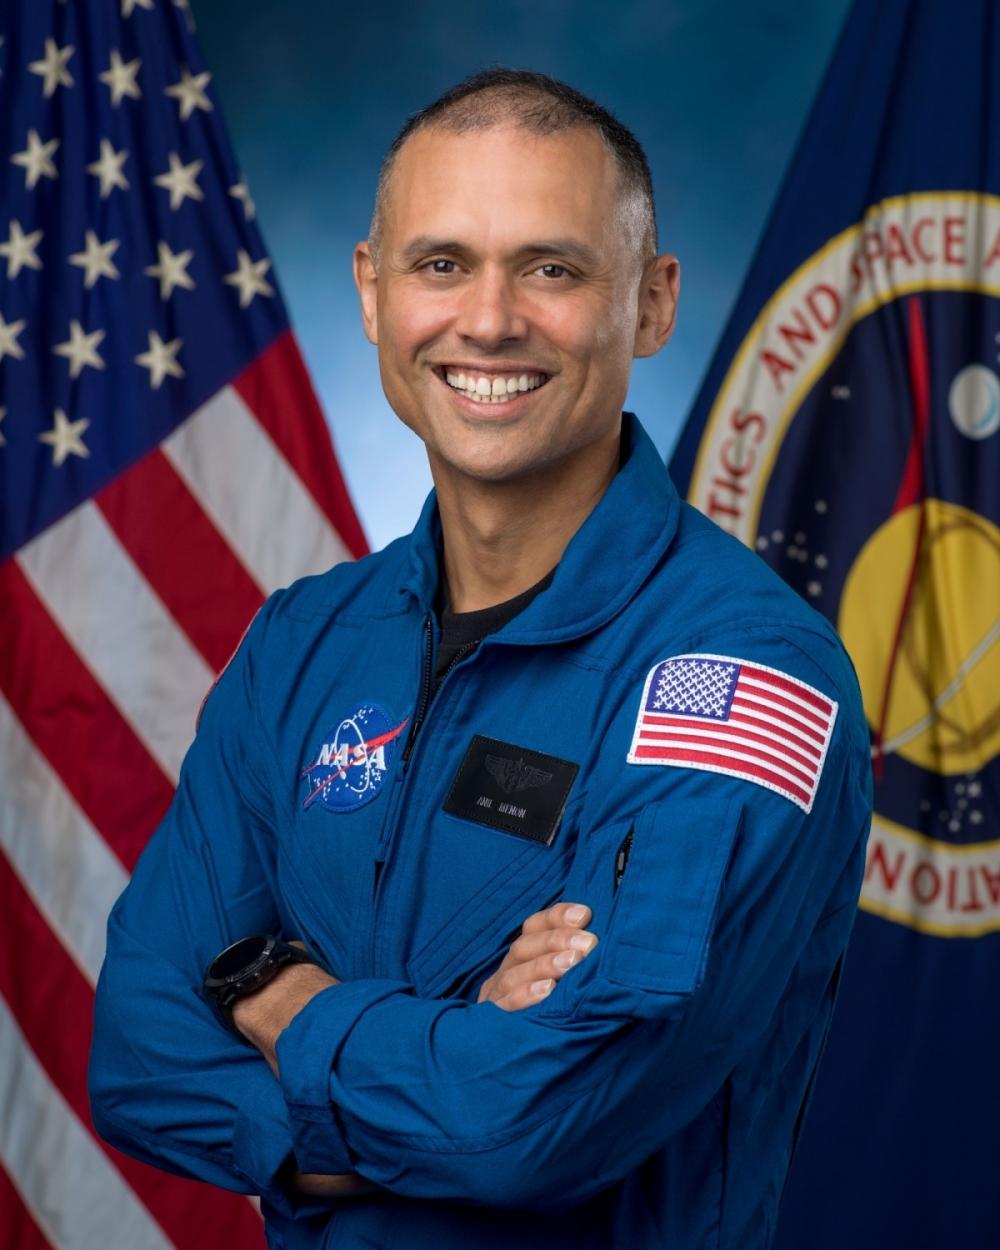 The Weekend Leader - NASA picks Anil Menon among 10 new astronauts for Moon mission